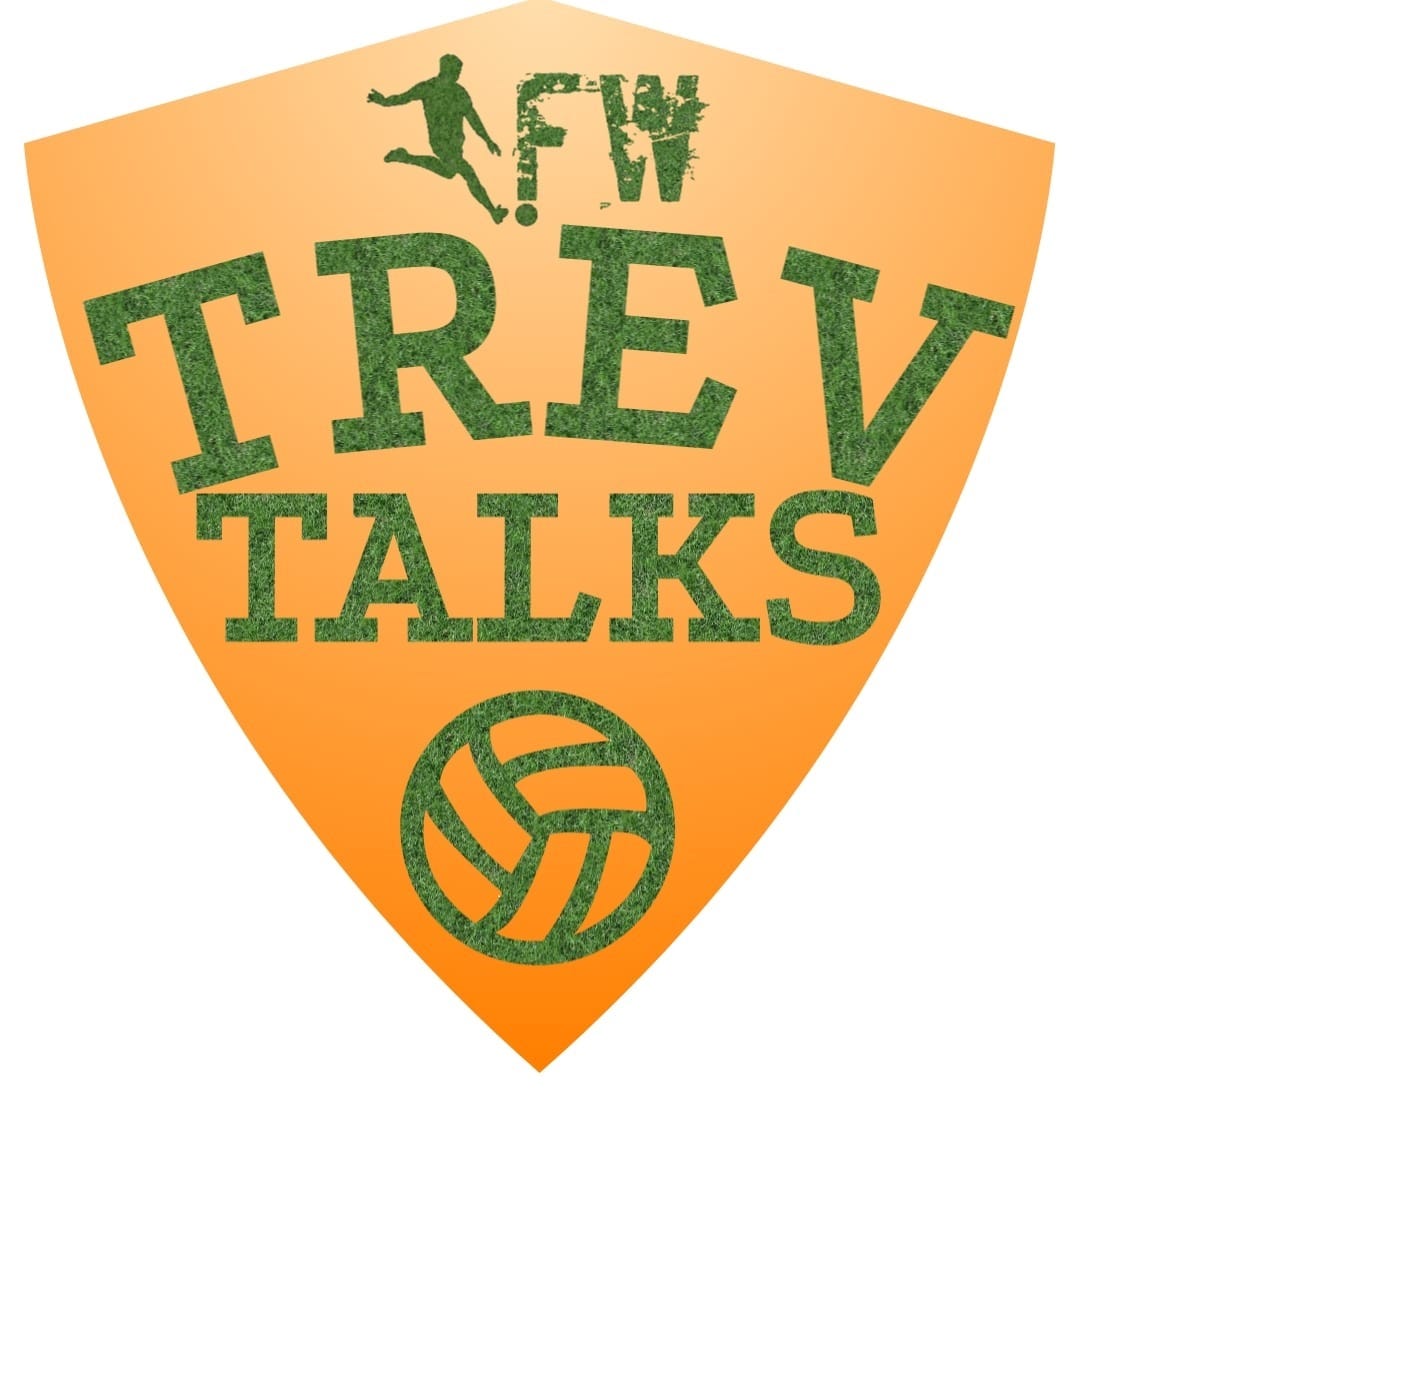 Episode One: The introduction to Trev Talks